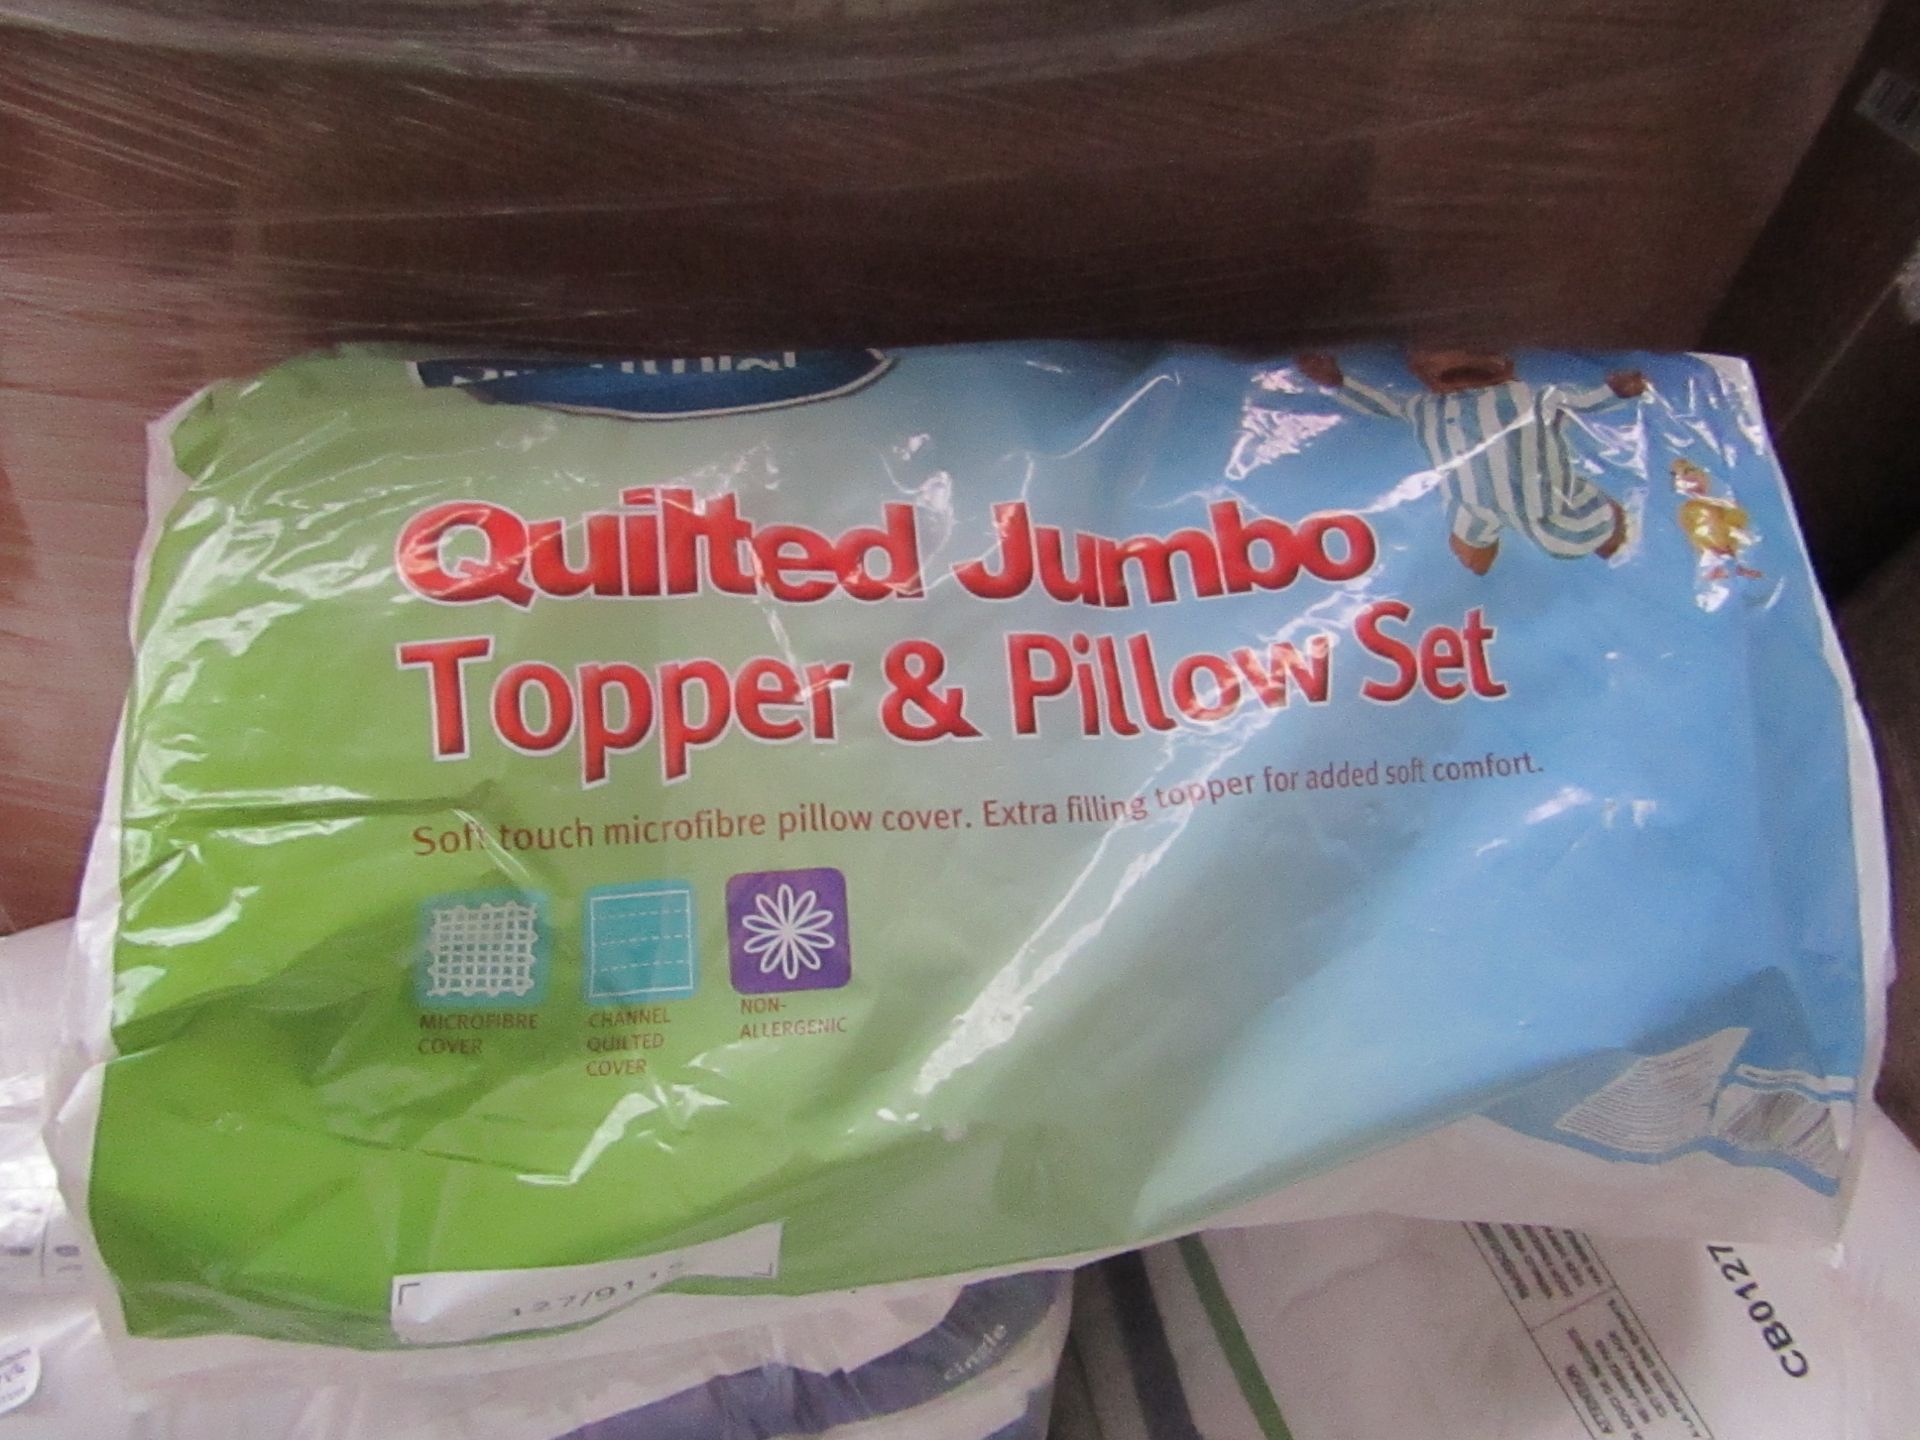 Silent Night Quilted Jumbo topper and pillow set single, brand new and packaged.  RRP £11.99